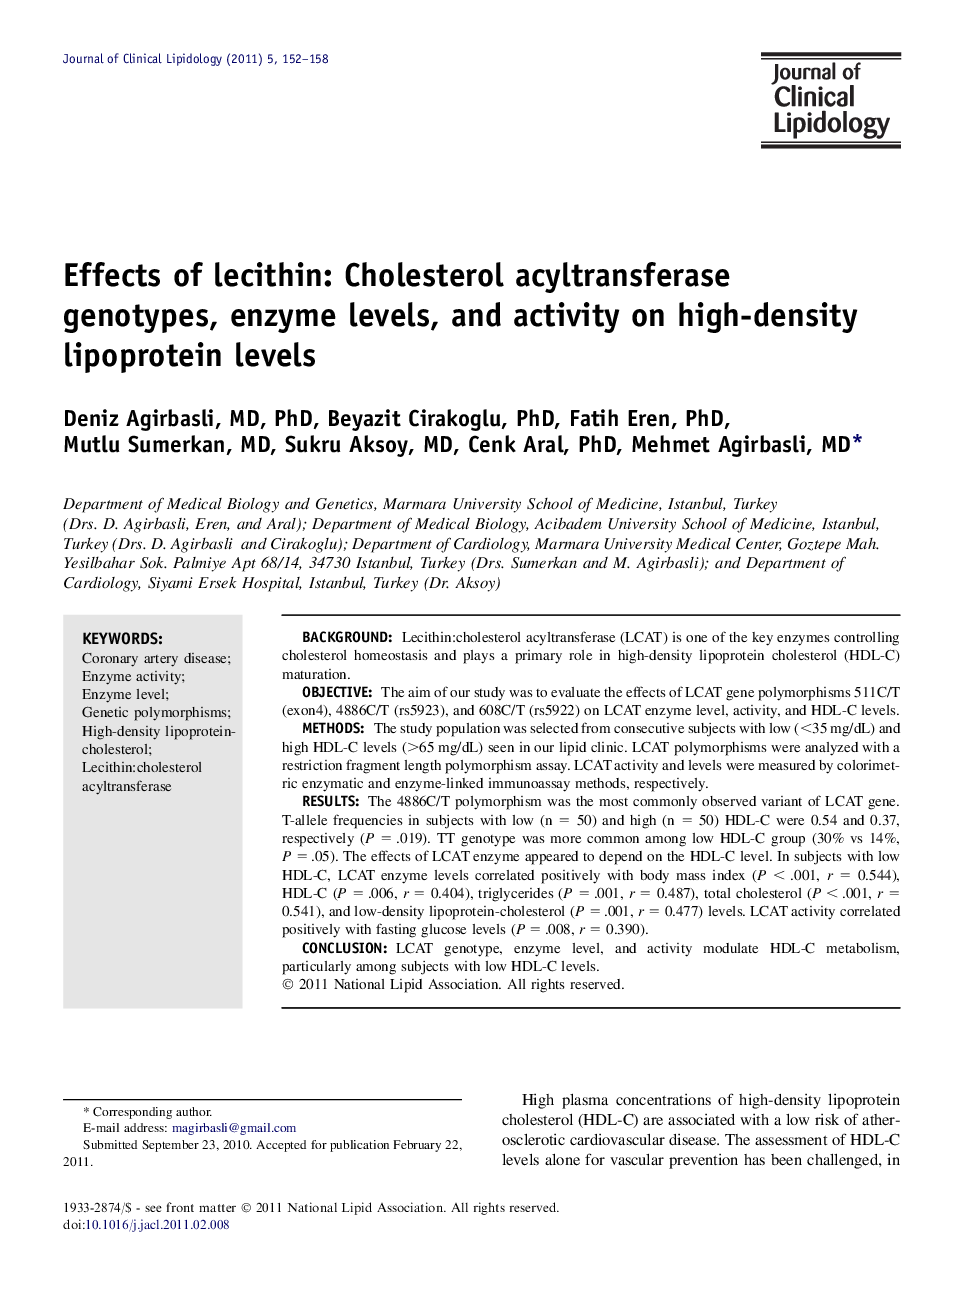 Effects of lecithin: Cholesterol acyltransferase genotypes, enzyme levels, and activity on high-density lipoprotein levels